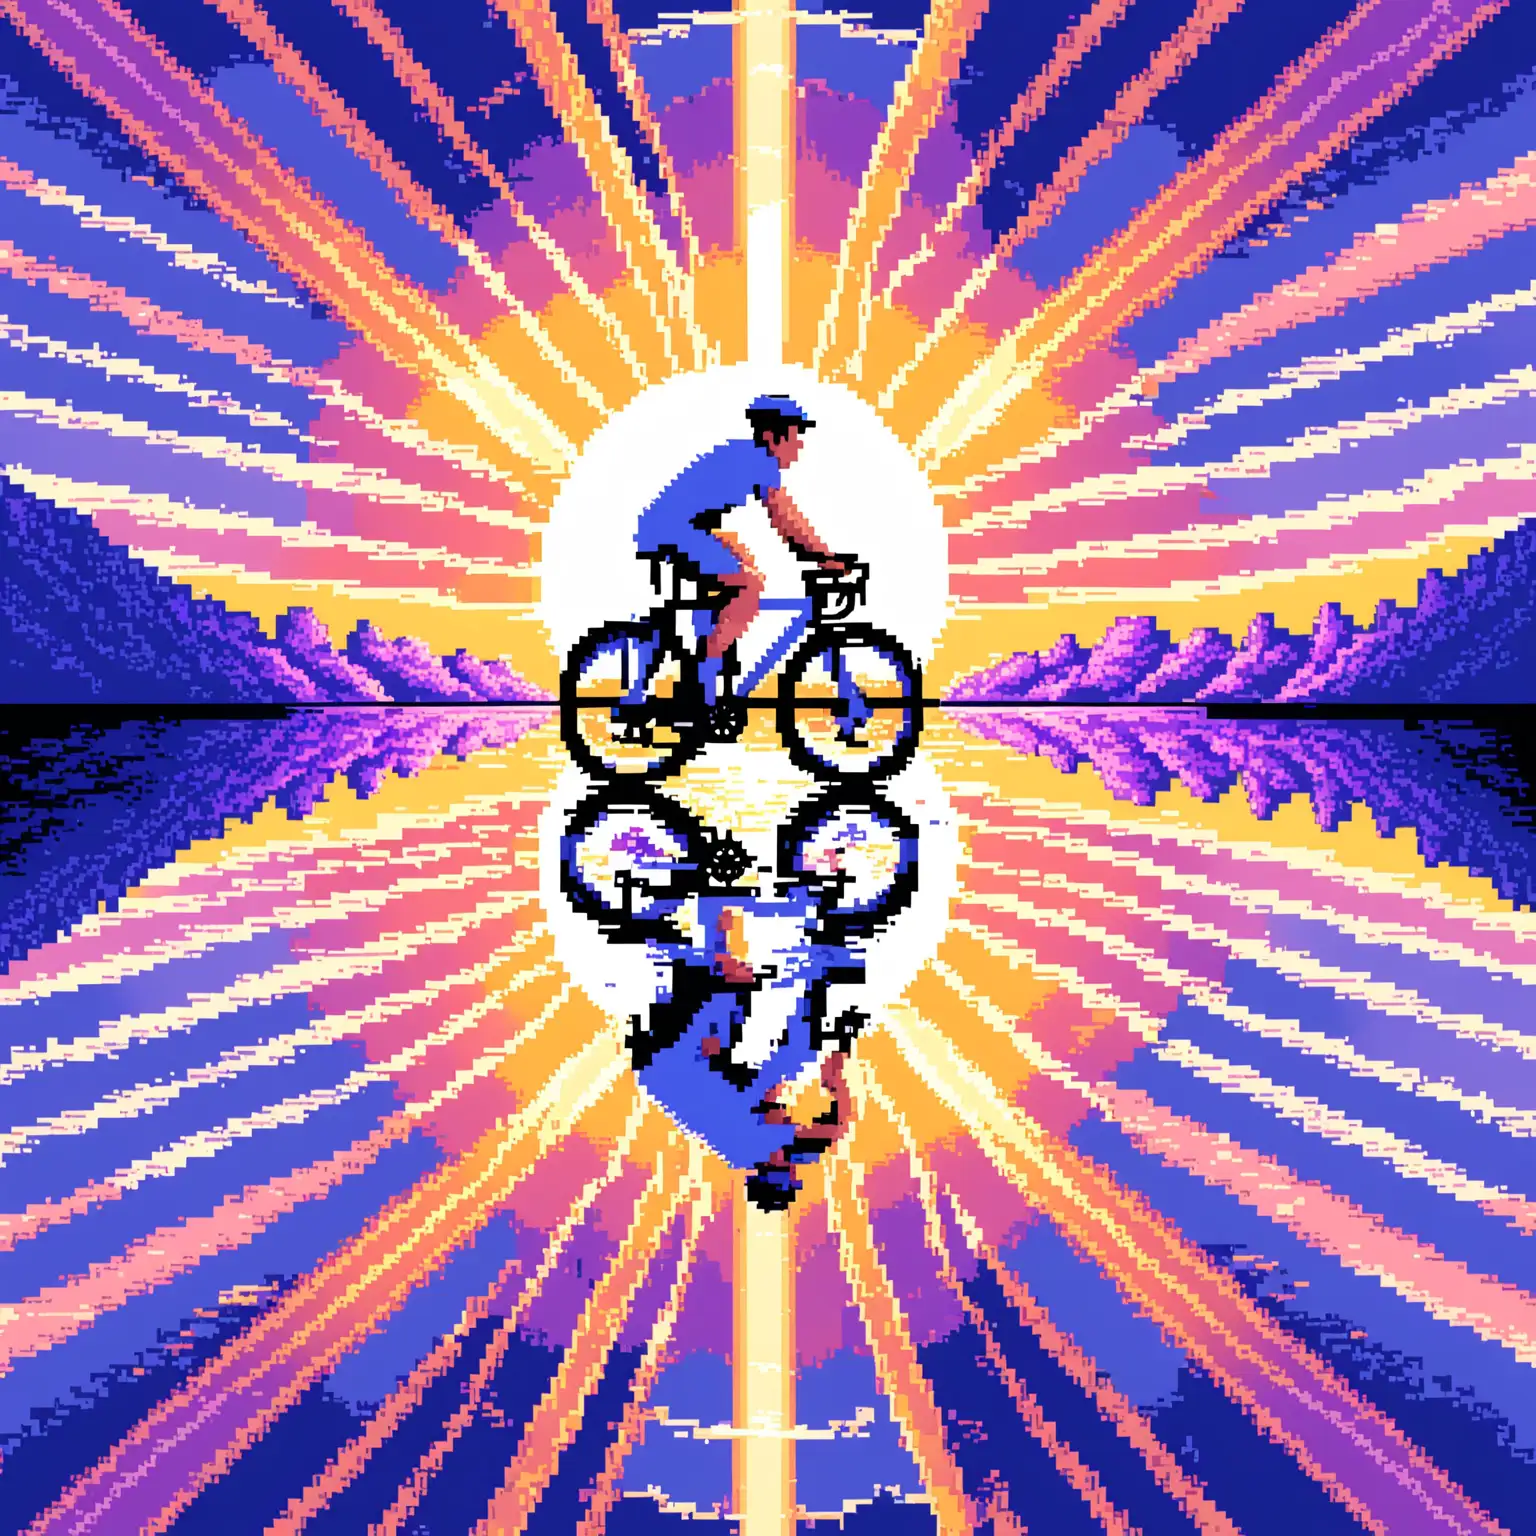 Pixel style, blue color, white color and purple color scheme, person riding a bicycle, rider fully reflected in the sun, as a profile picture, cyclist should take up large image space